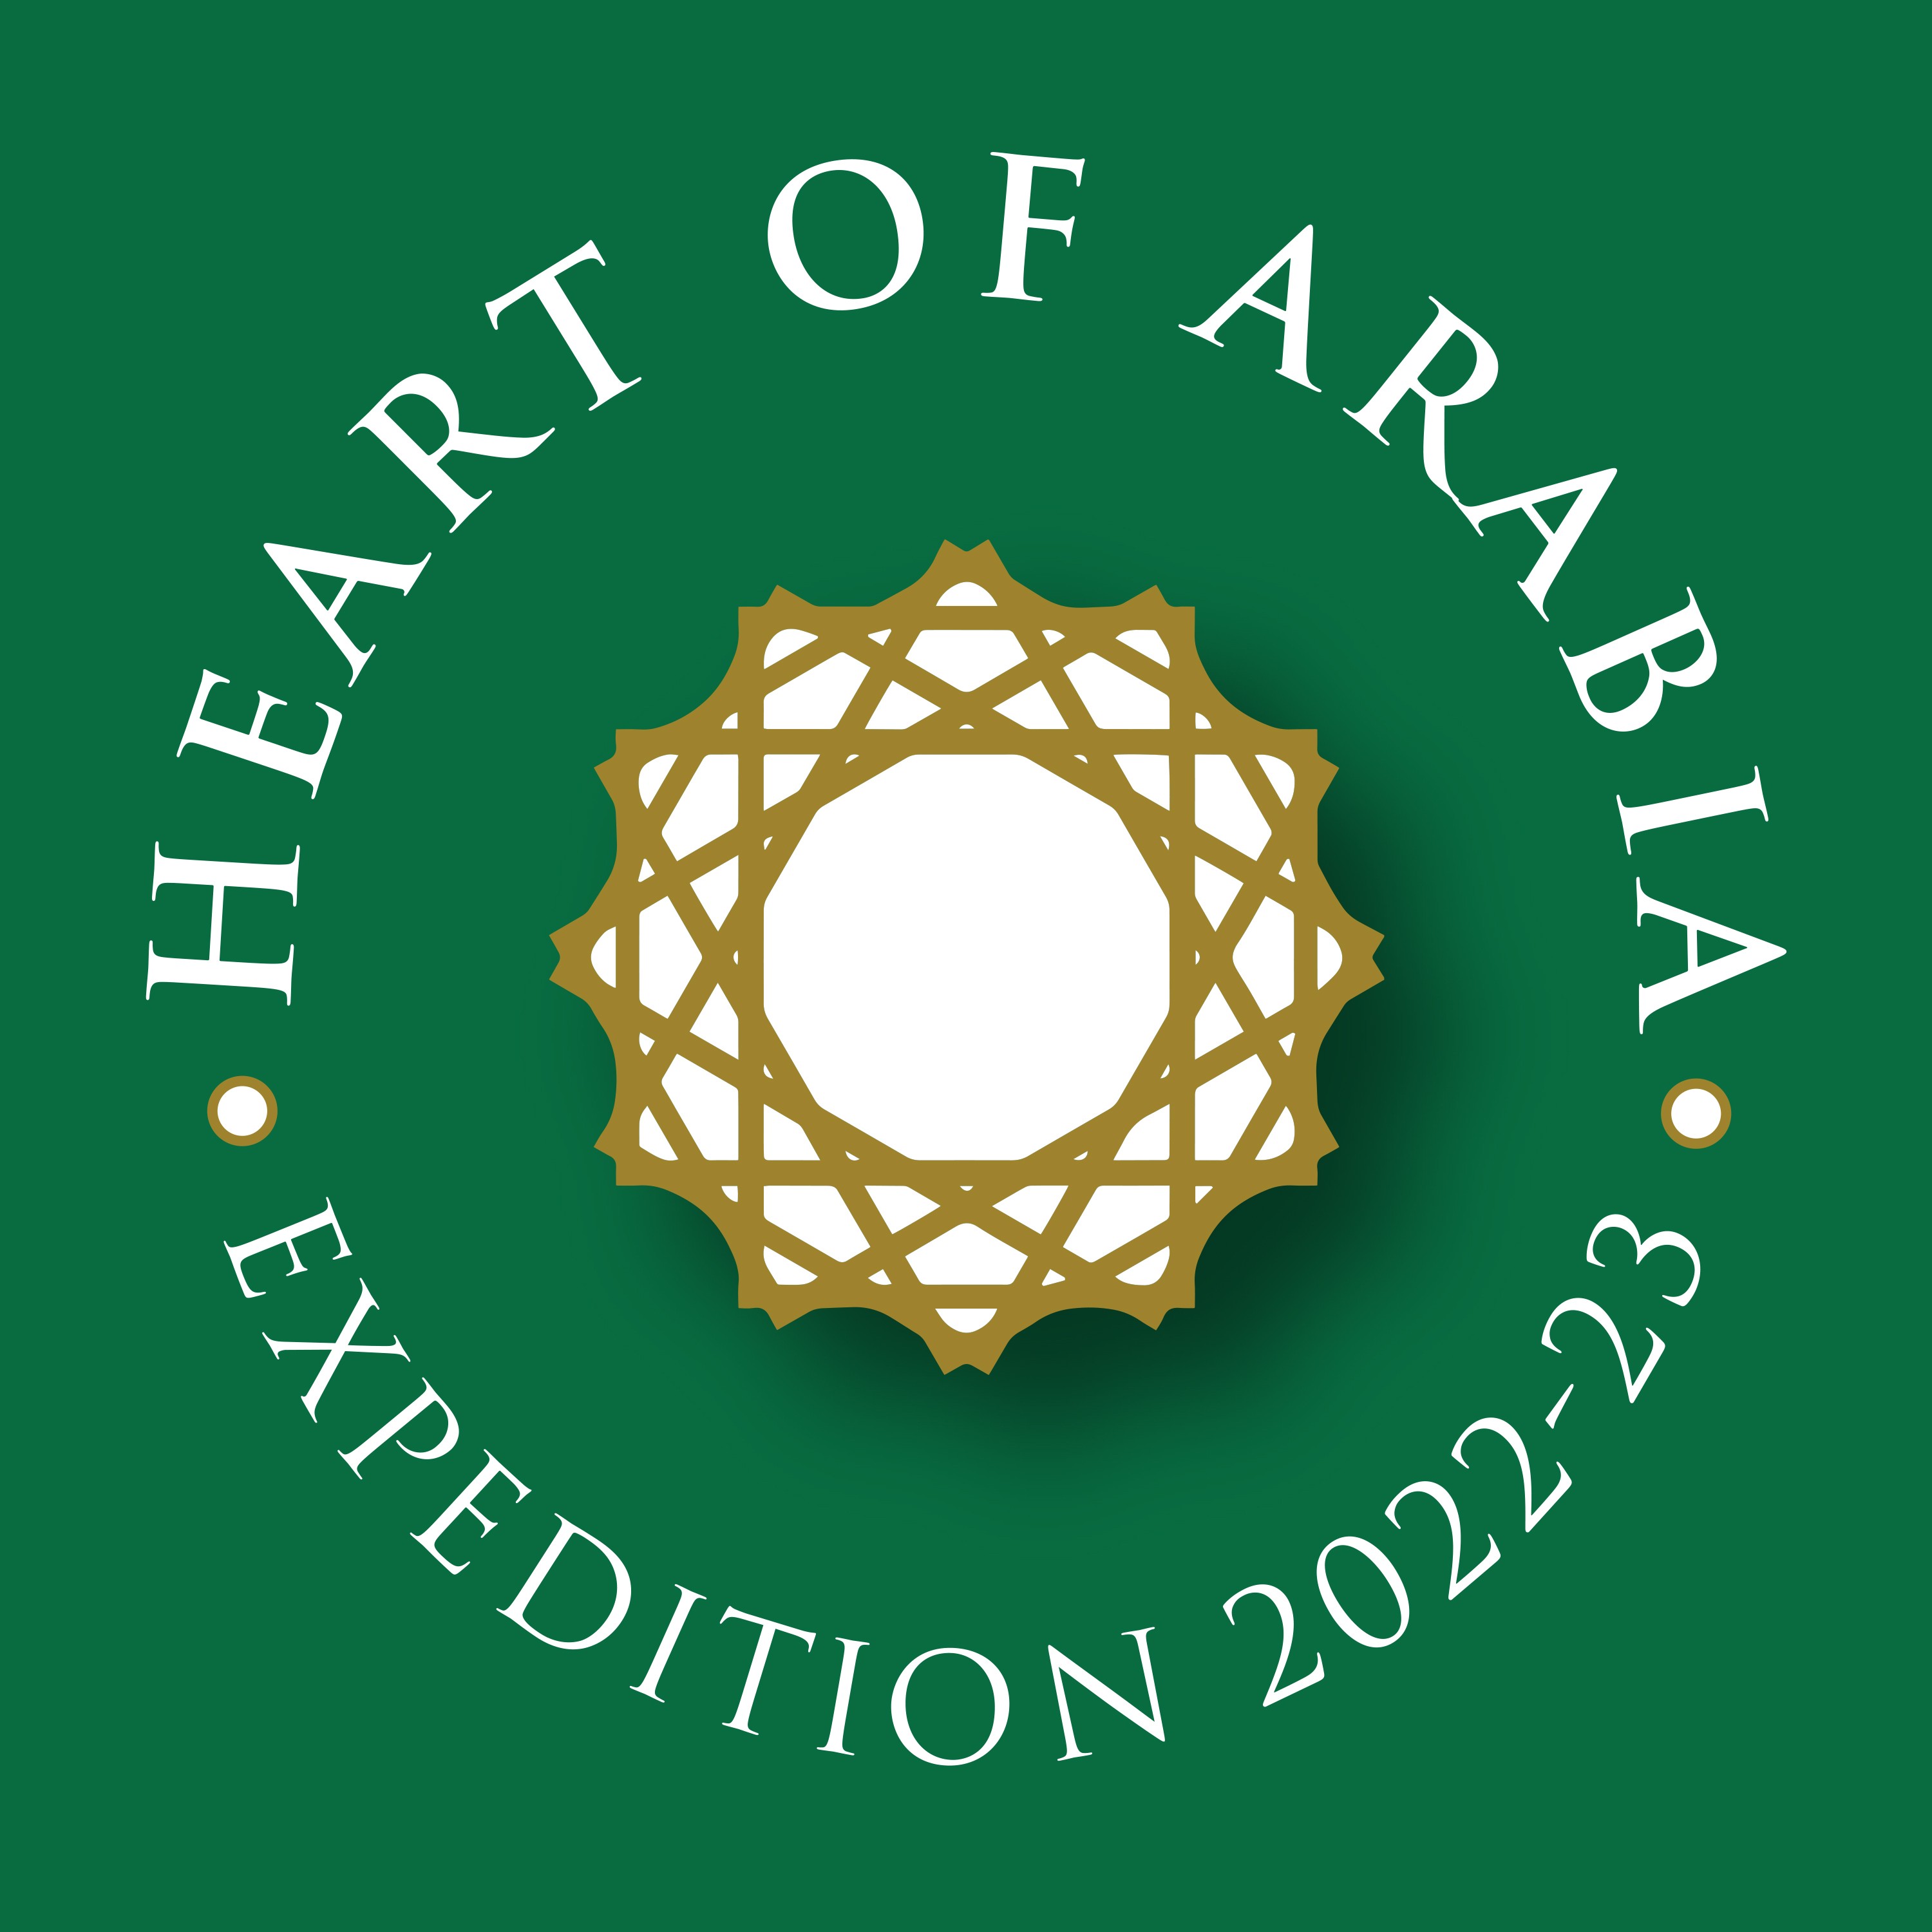 Show artwork for Heart of Arabia Expedition